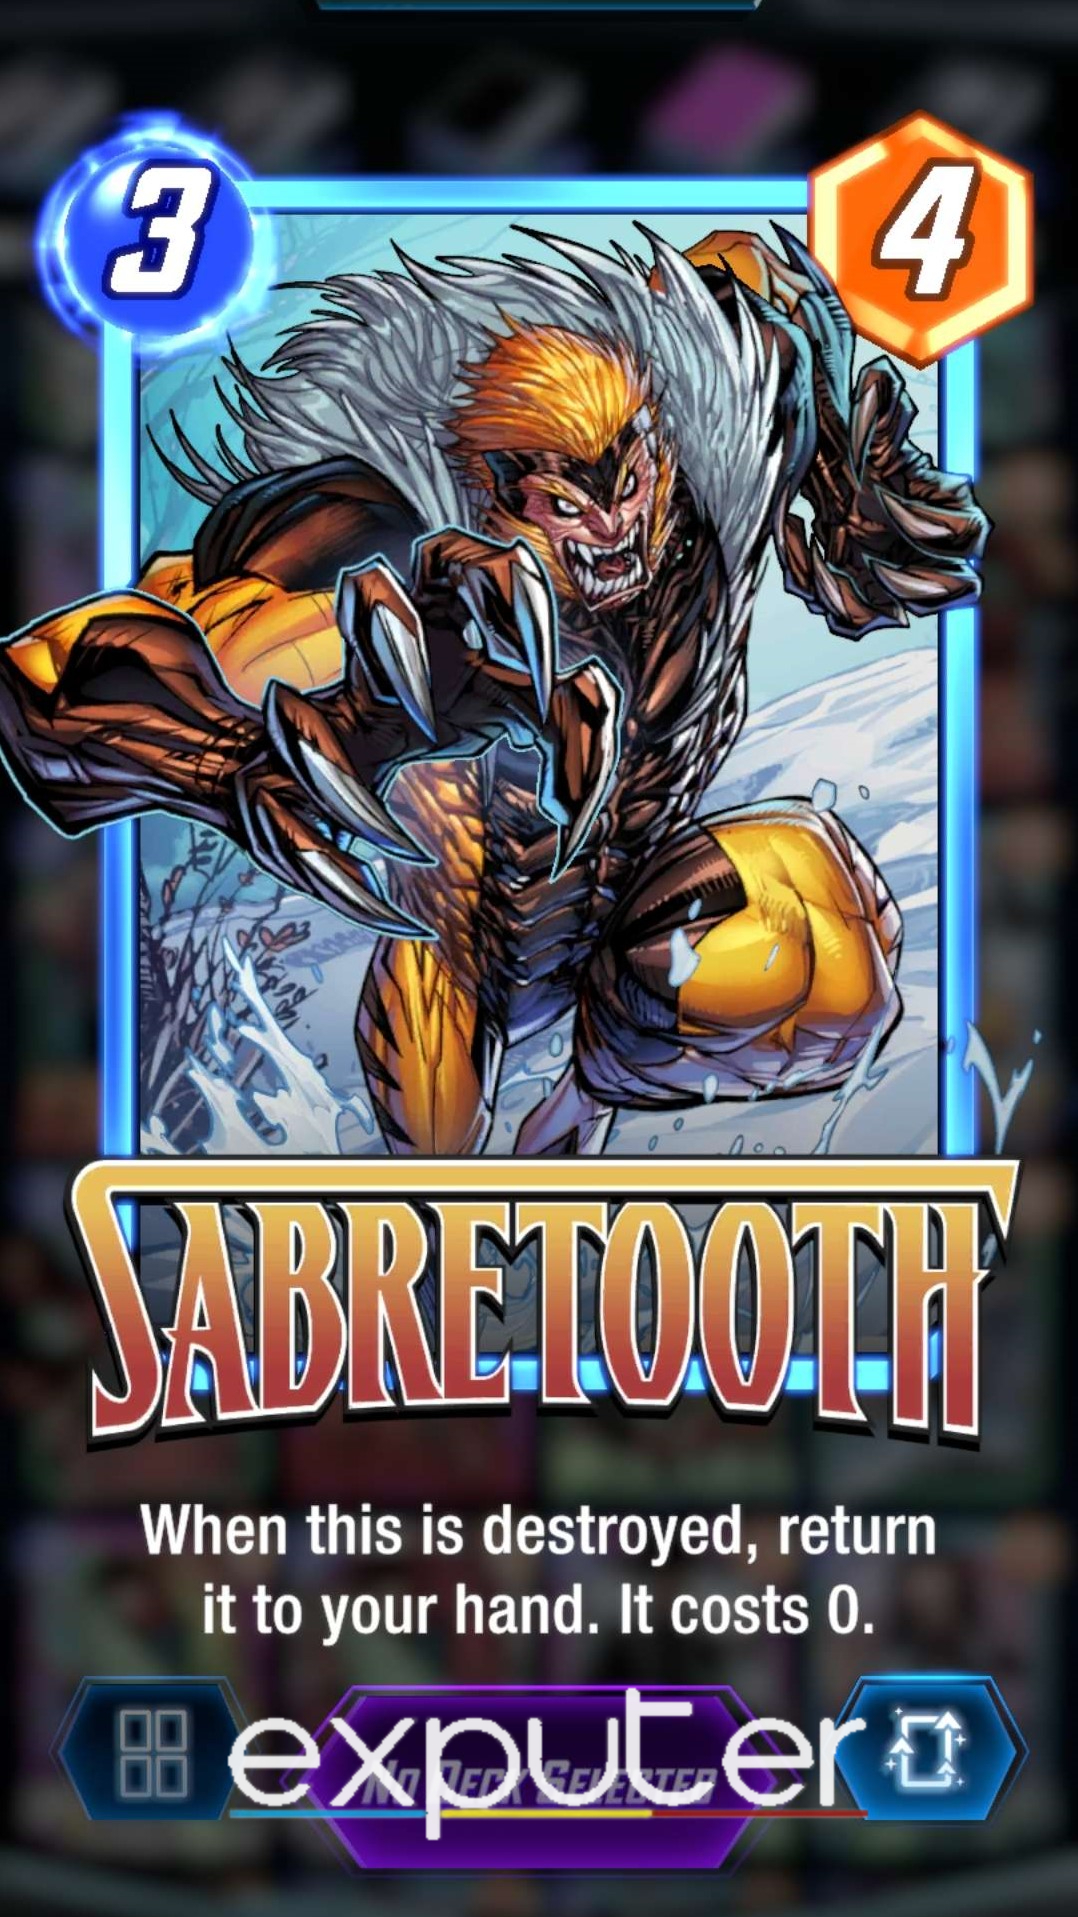 Showcasing Sabretooth, a card meant for a Destroy deck that returns to your hand once destroyed